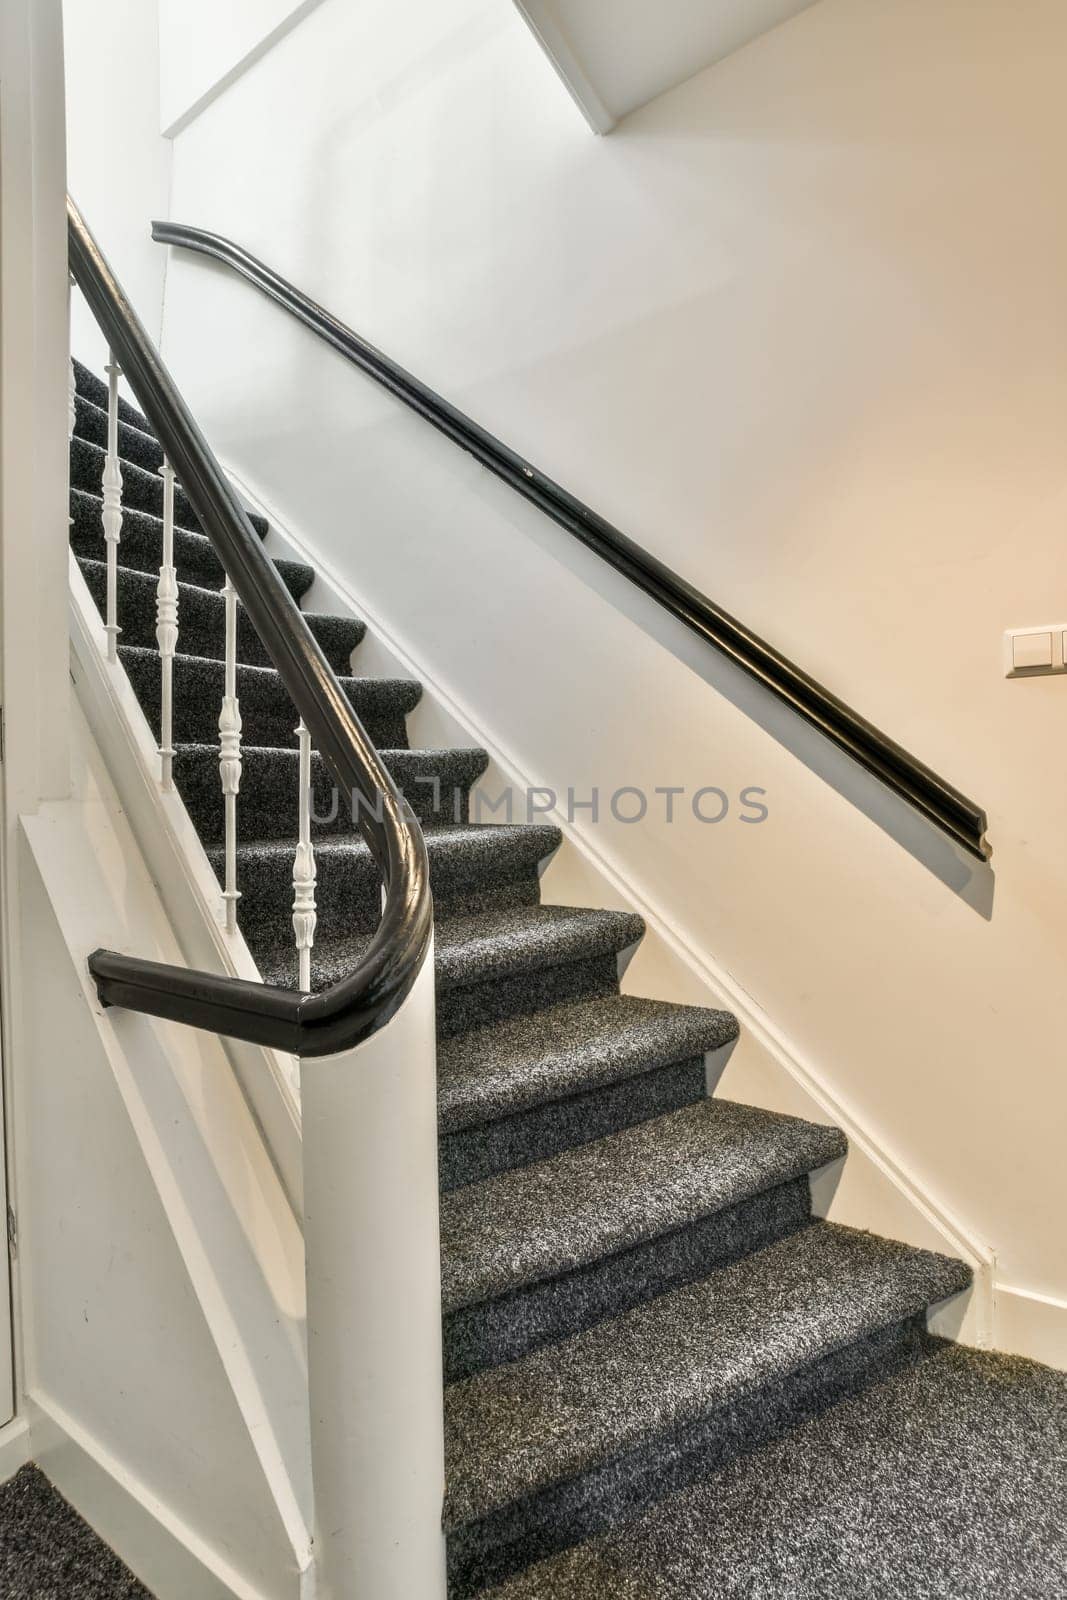 some stairs in a house that is white and has grey carpet on the floor, with black railings leading up to the top